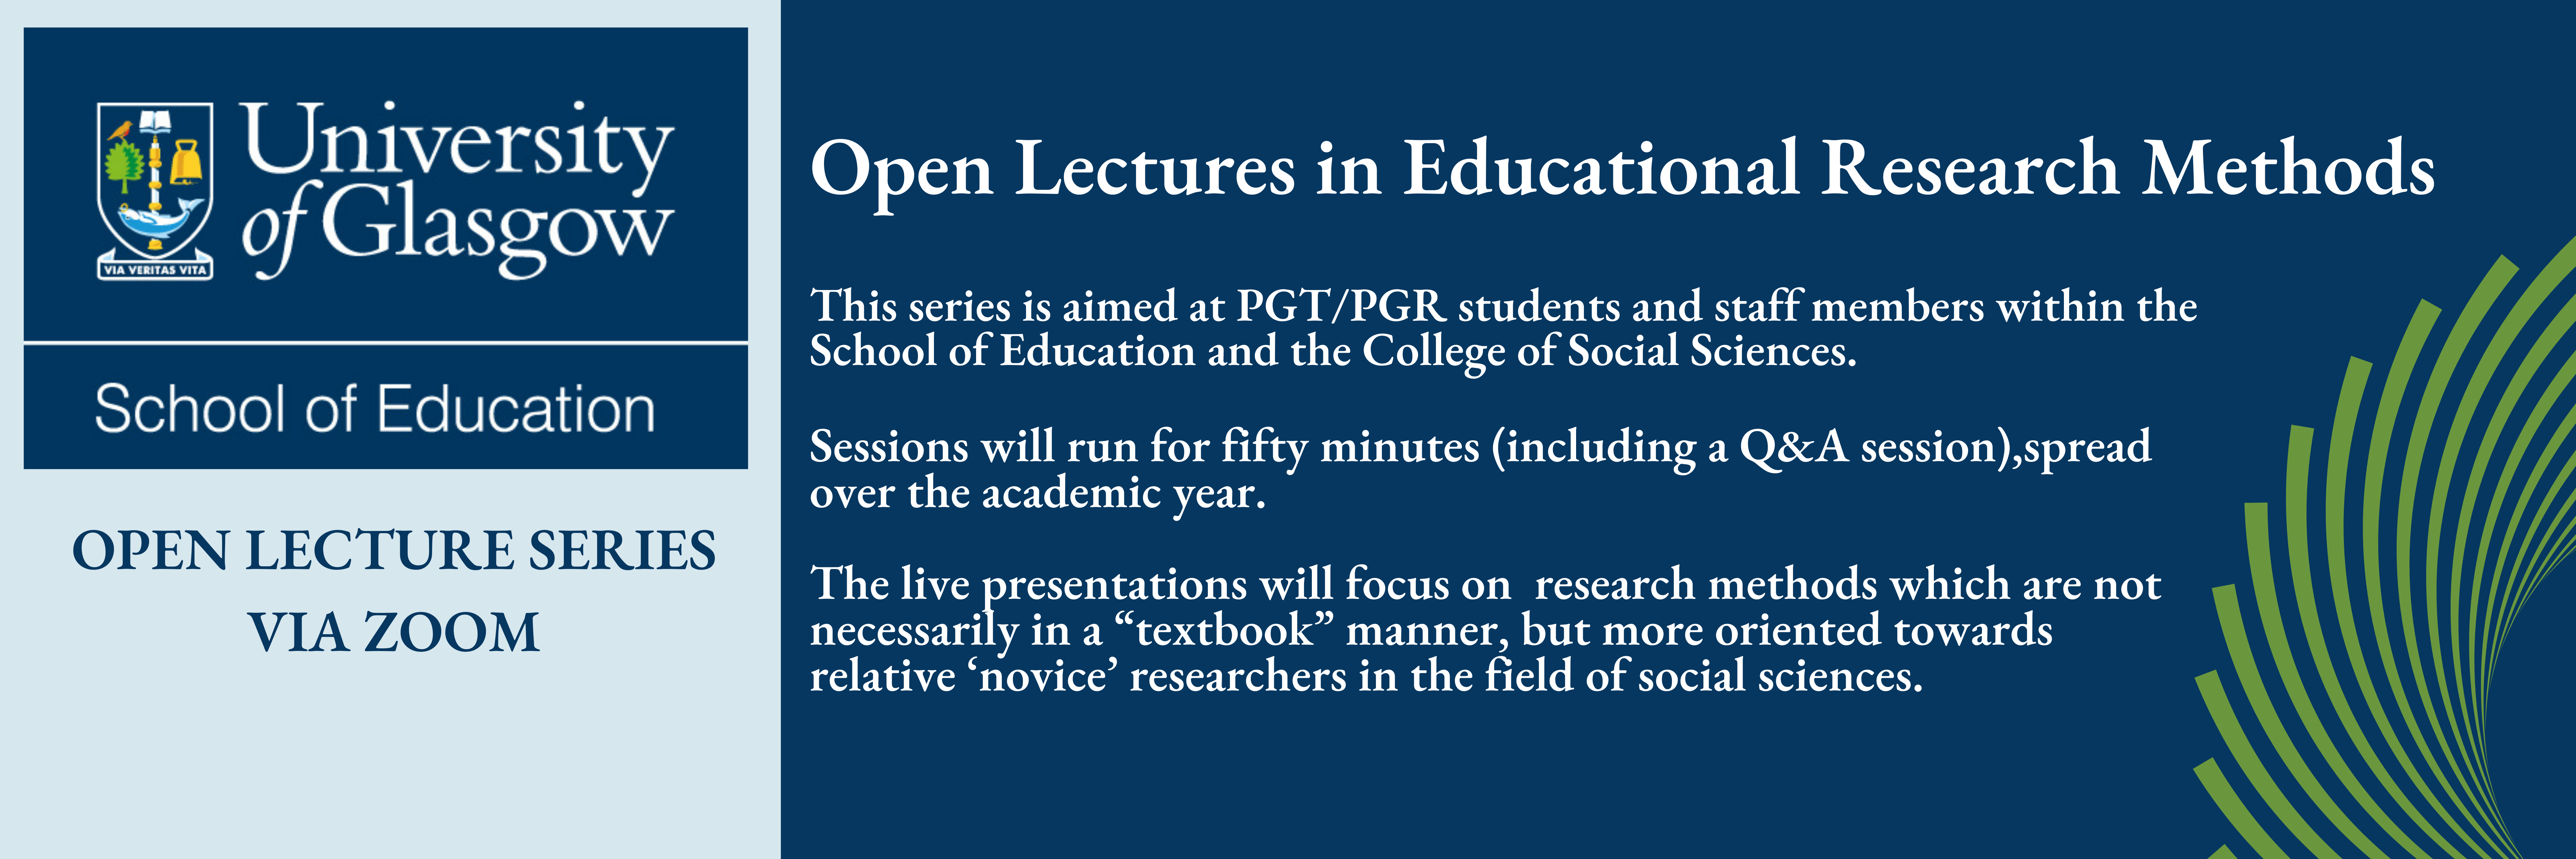 banner promoting open lecture series